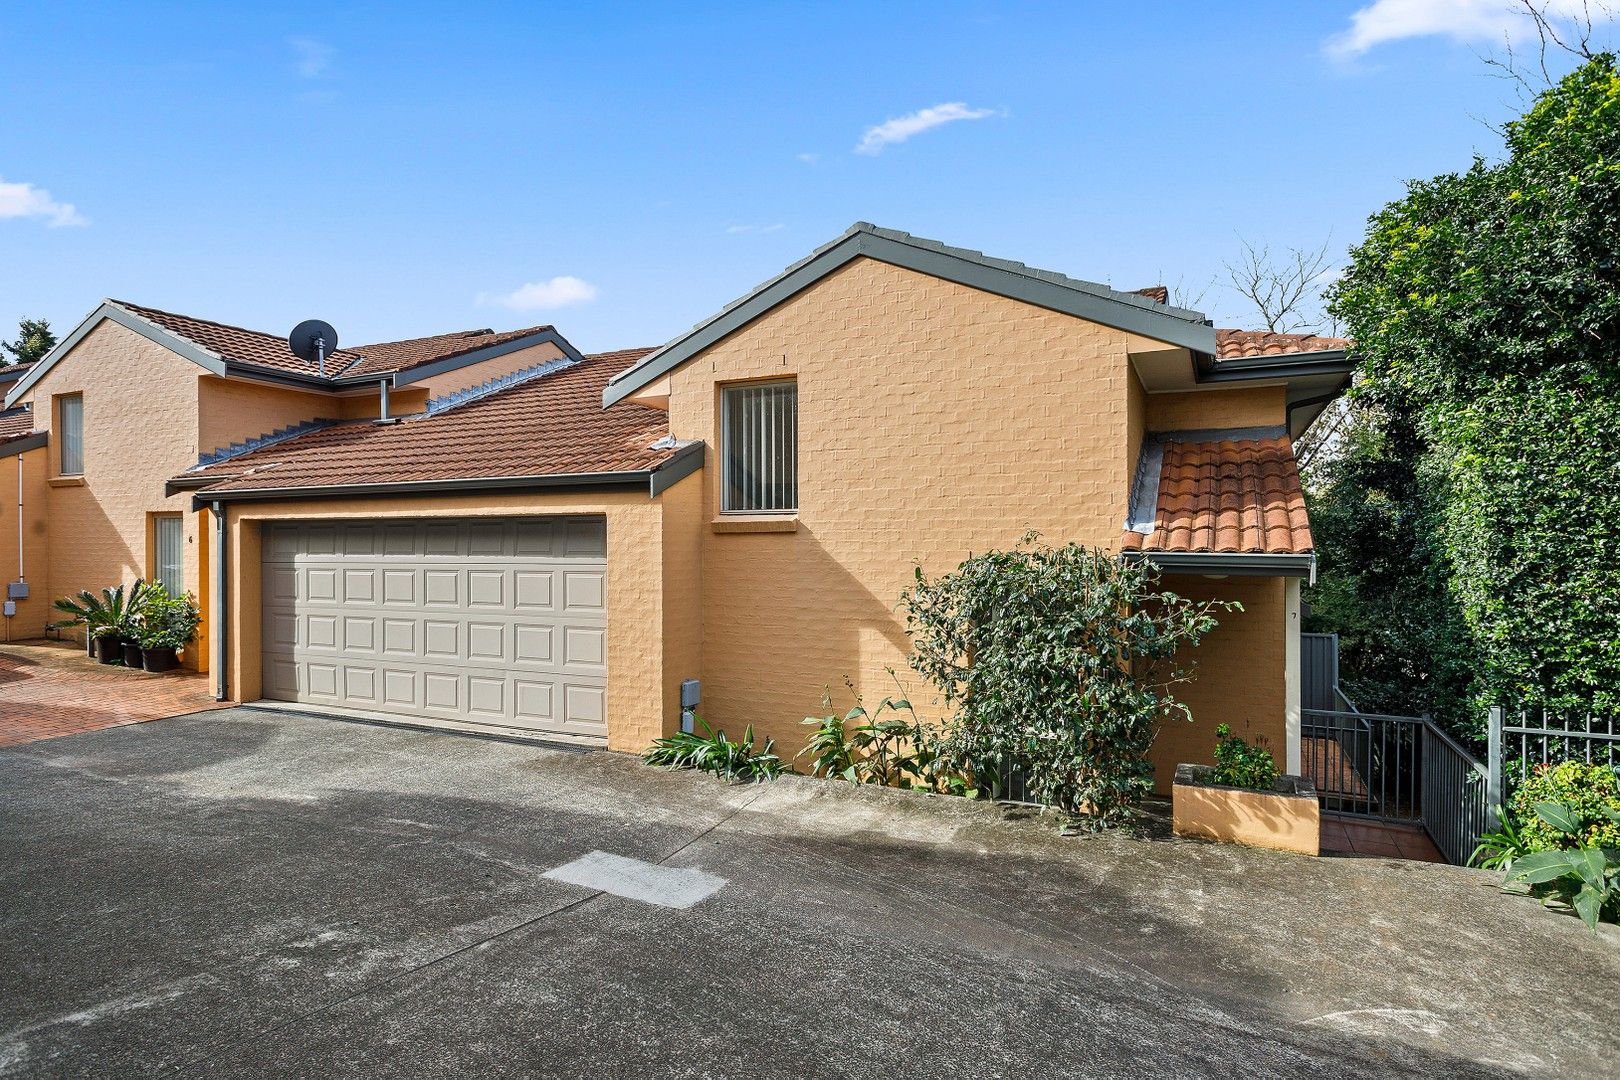 3 bedrooms Townhouse in 7/31-33 Hillcrest Street WOLLONGONG NSW, 2500